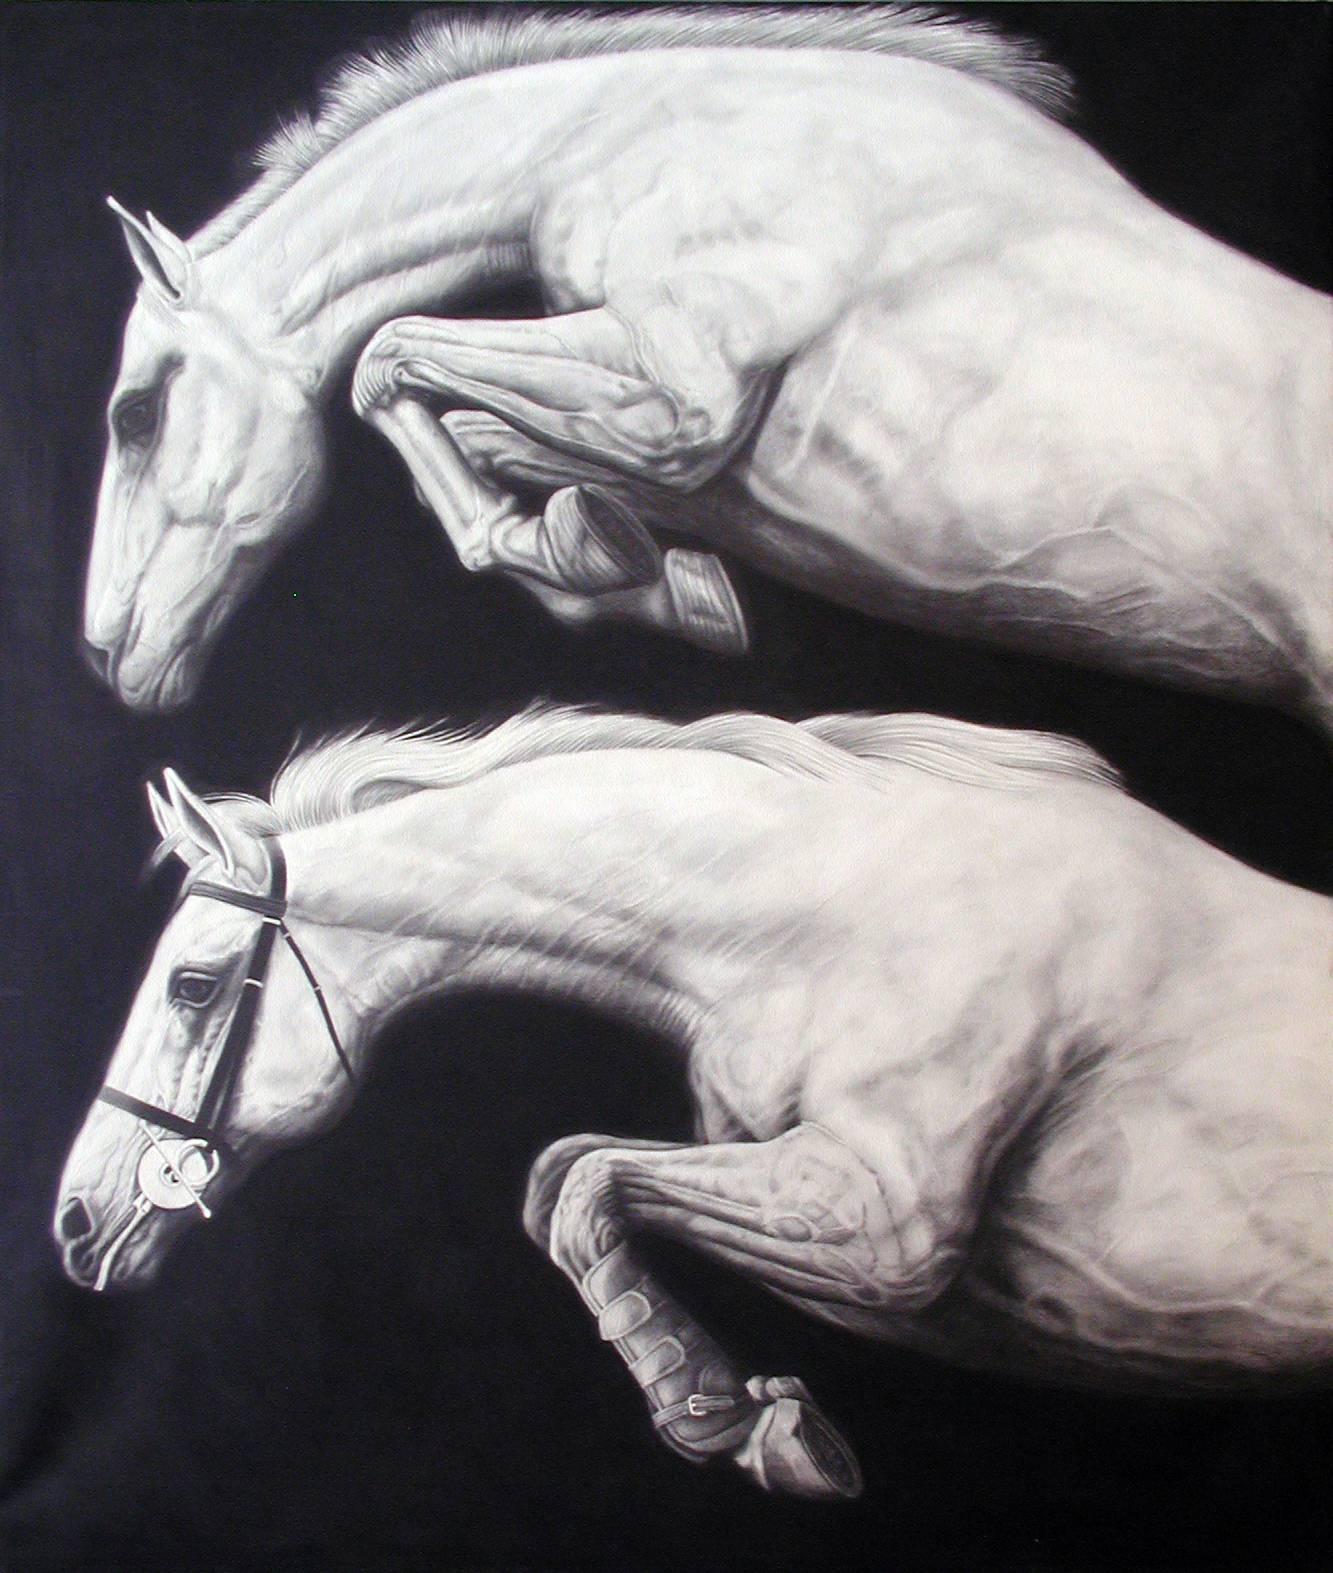 Joseph Piccillo Animal Art - Two Leaping Horses, Large Scale Charcoal Drawing on Canvas, Animal, Graphite